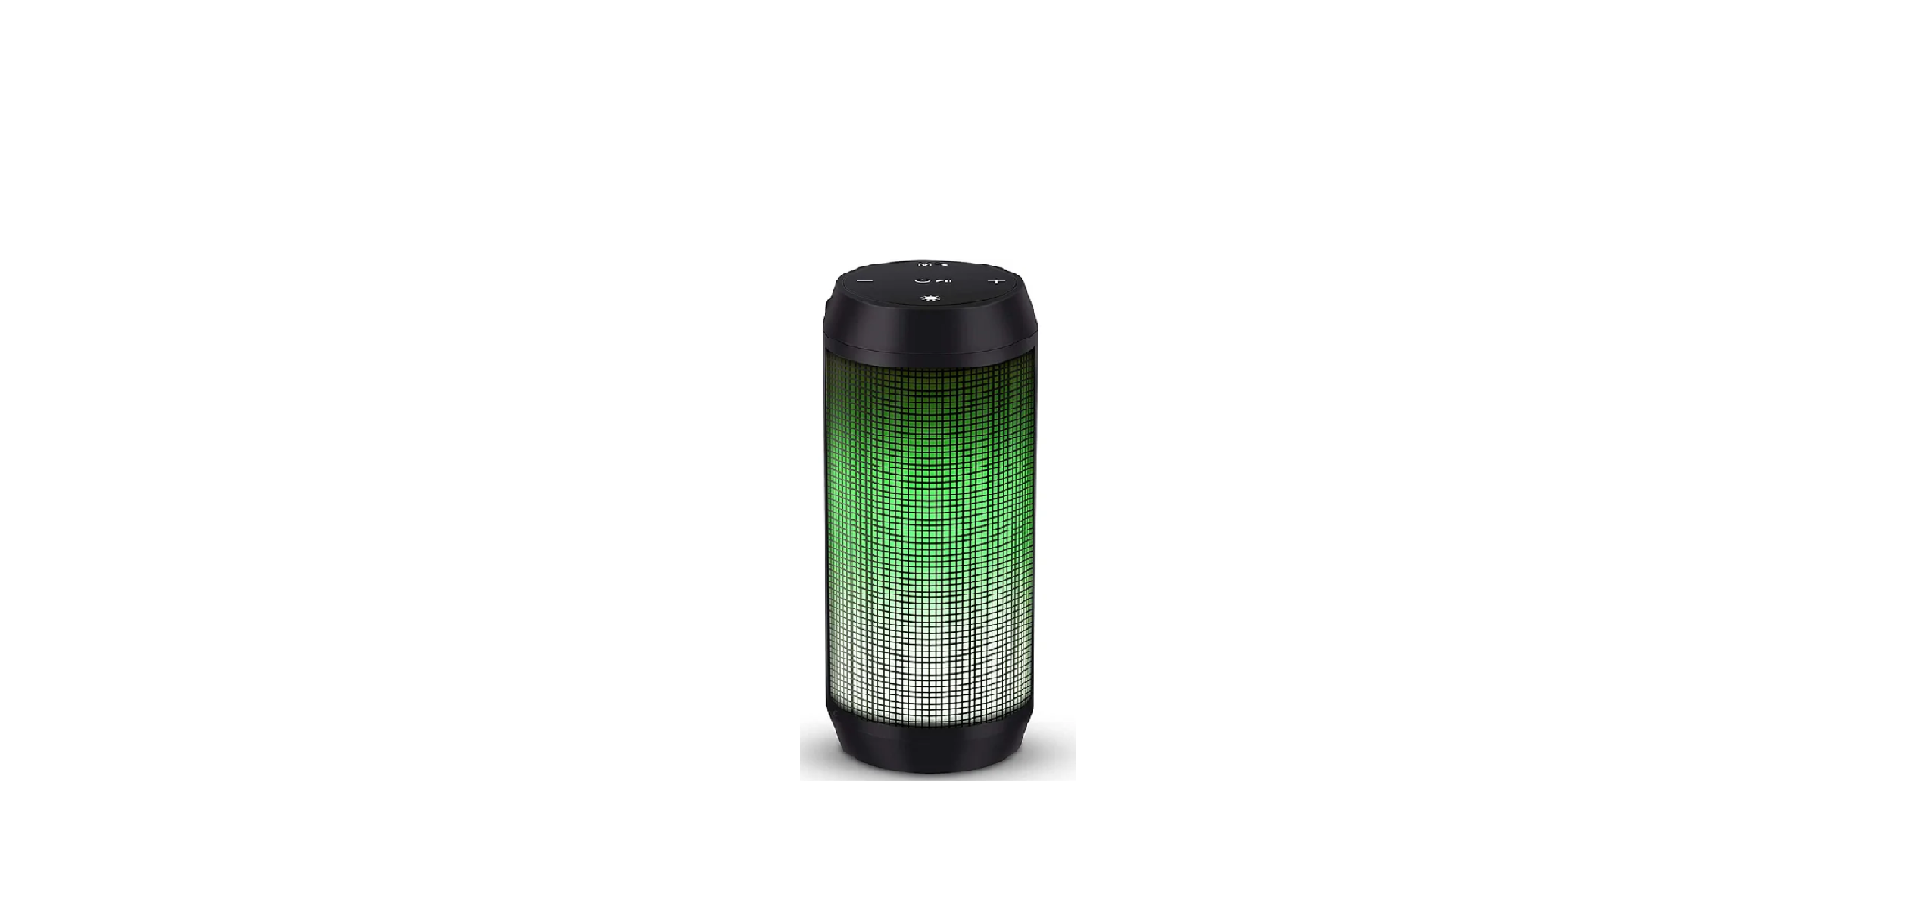 Elhot-Rechargeable-Portable-Bluetooth-Speaker-FEATURE